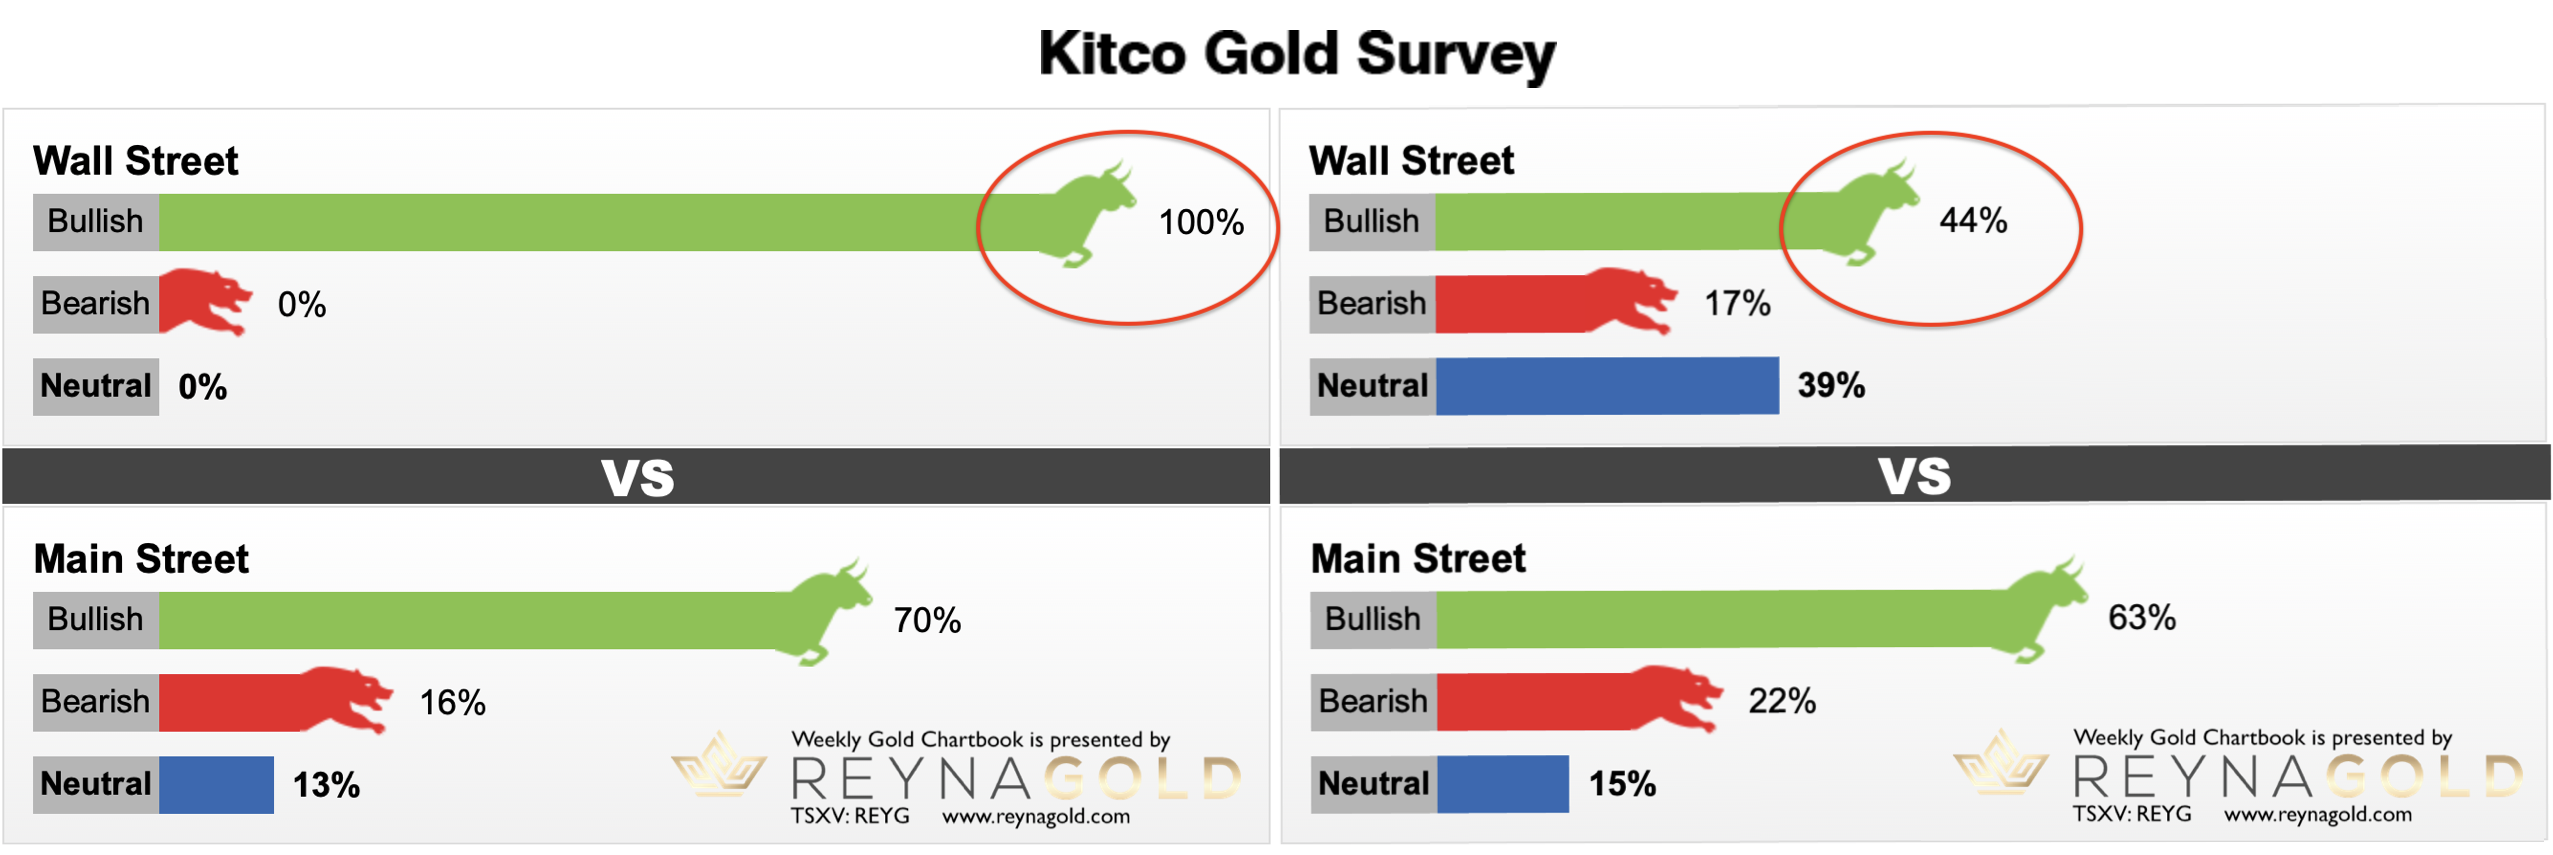 Kitco Gold Survey as of March 4th, 2022 vs. Kitco Gold Survey as of March 11th, 2022. March 13th 2022, Gold Chartbook - Spring correction or further escalation?